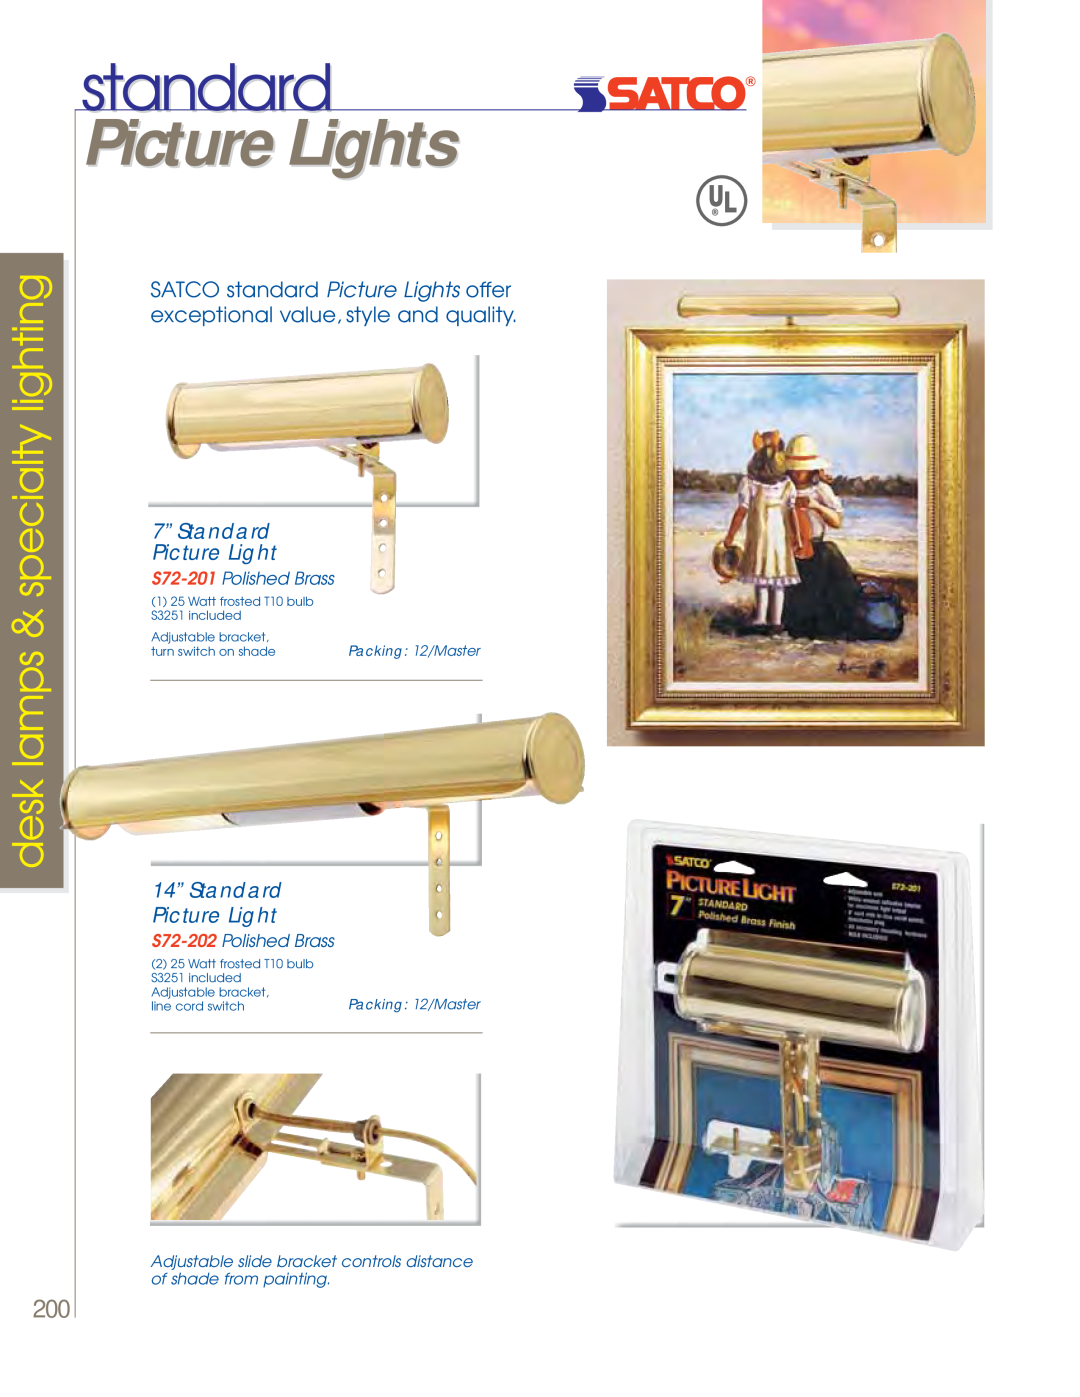 Satco Products 60-800 standard, Picture Lights, desk lamps & specialty lighting, S72-201 Polished Brass, Packing 12/Master 